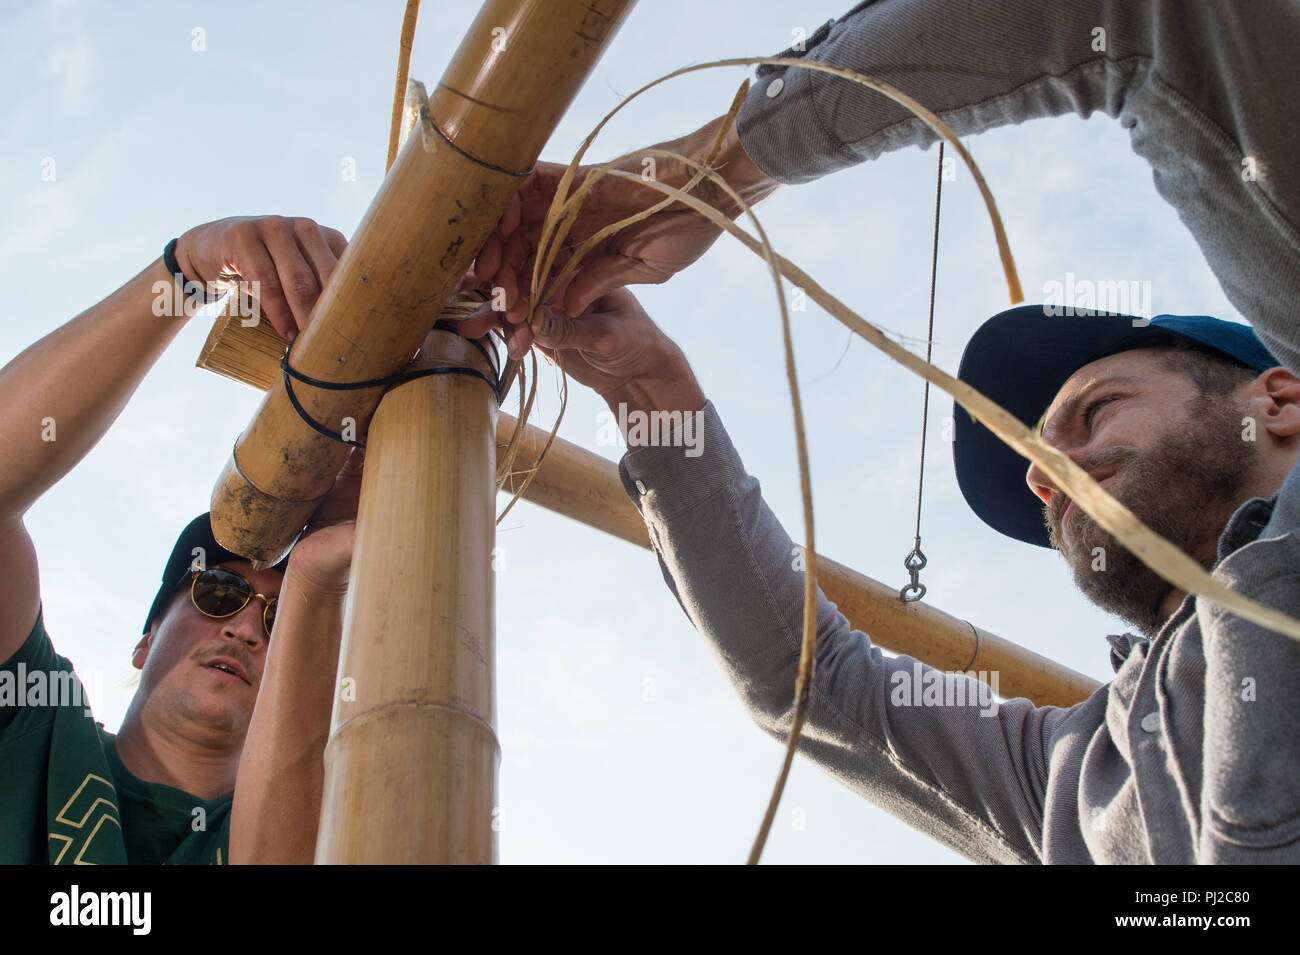 04.09.2018, Saxony-Anhalt, Magdeburg: Manfred Gramer (l) and Stepahn Murer  of the "Kulturanker" association fix the bamboo poles on a pavilion under  construction in the Elbauenpark. A larger edition of the bamboo building,